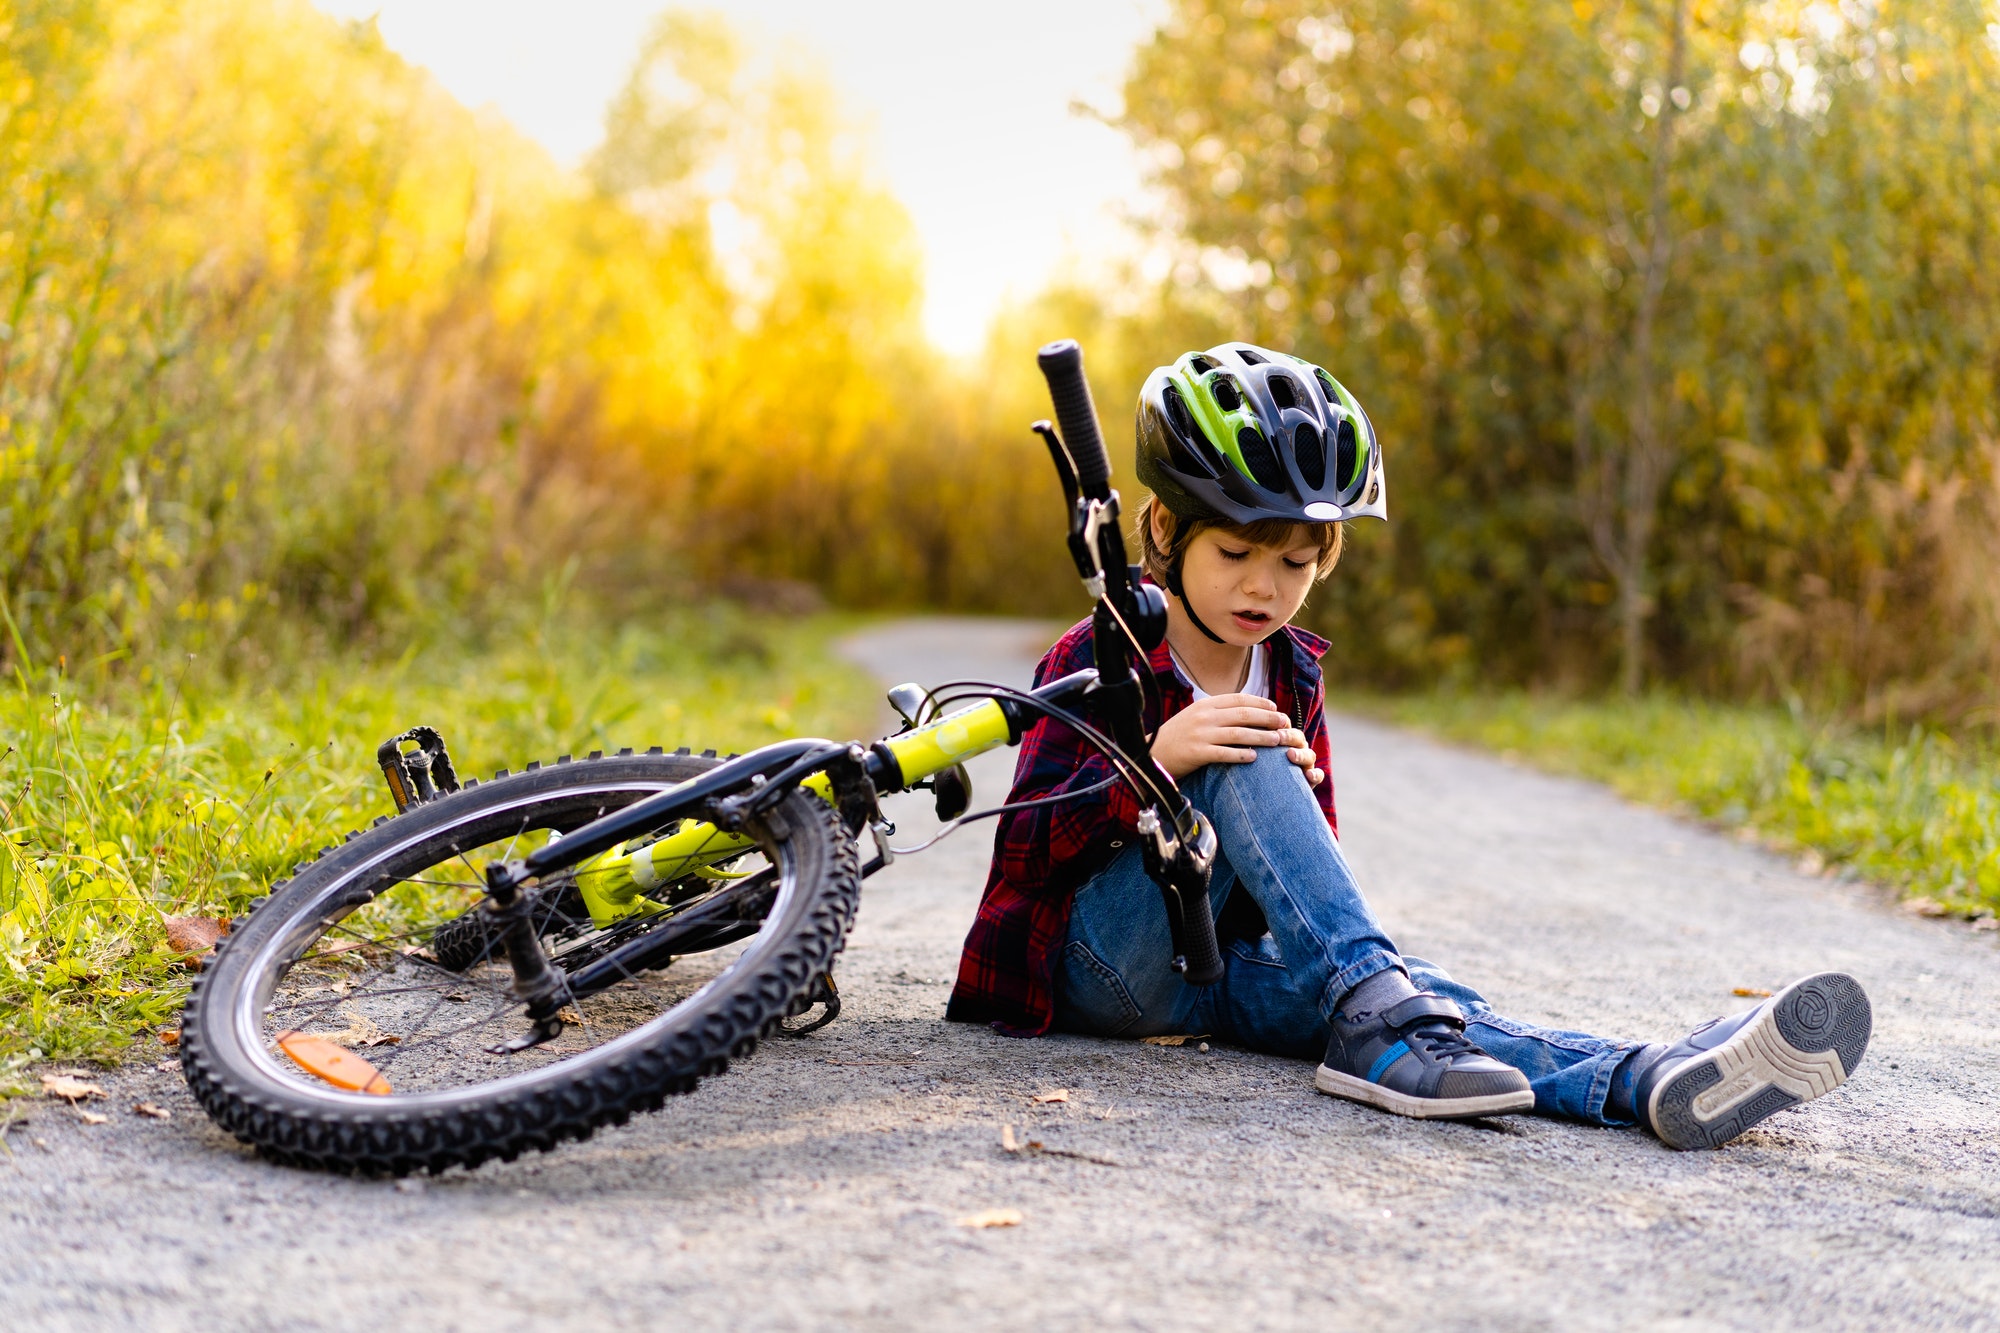 A little boy fell off a bicycle, injuries on active sports